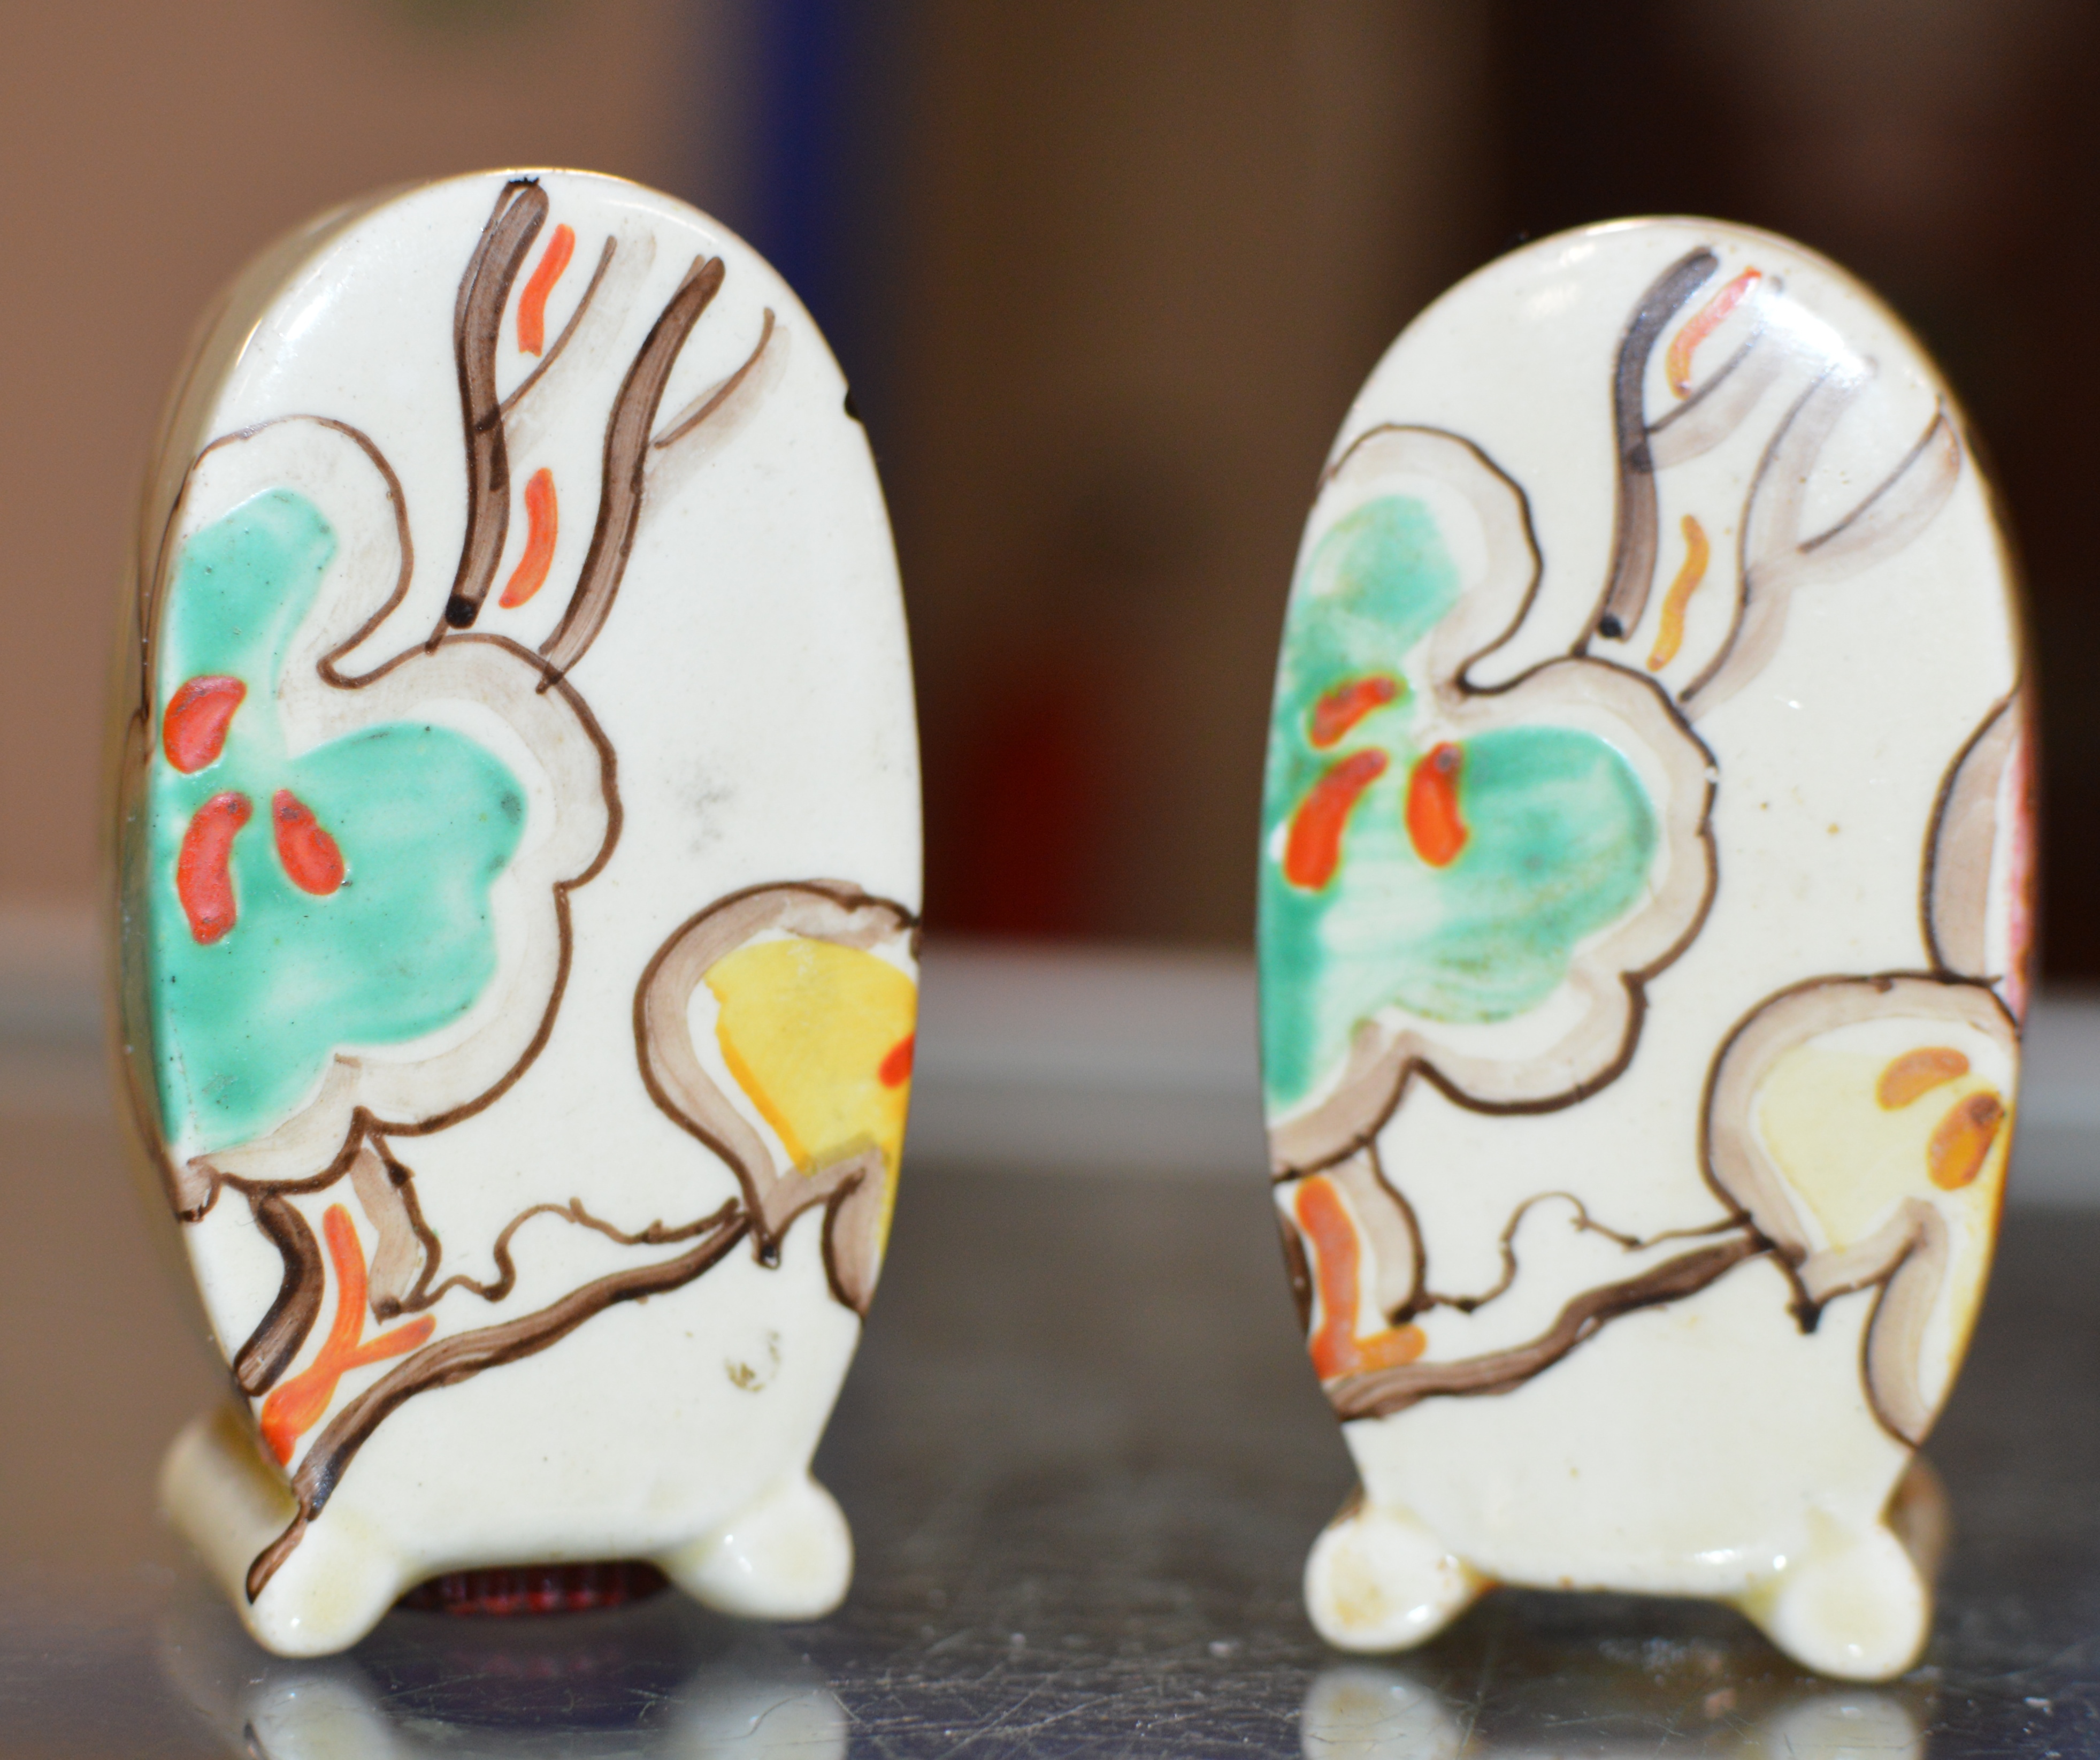 A PAIR OF ART DECO HAND PAINTED SALT & PEPPER CRUETS IN THE STYLE OF CLARICE CLIFF